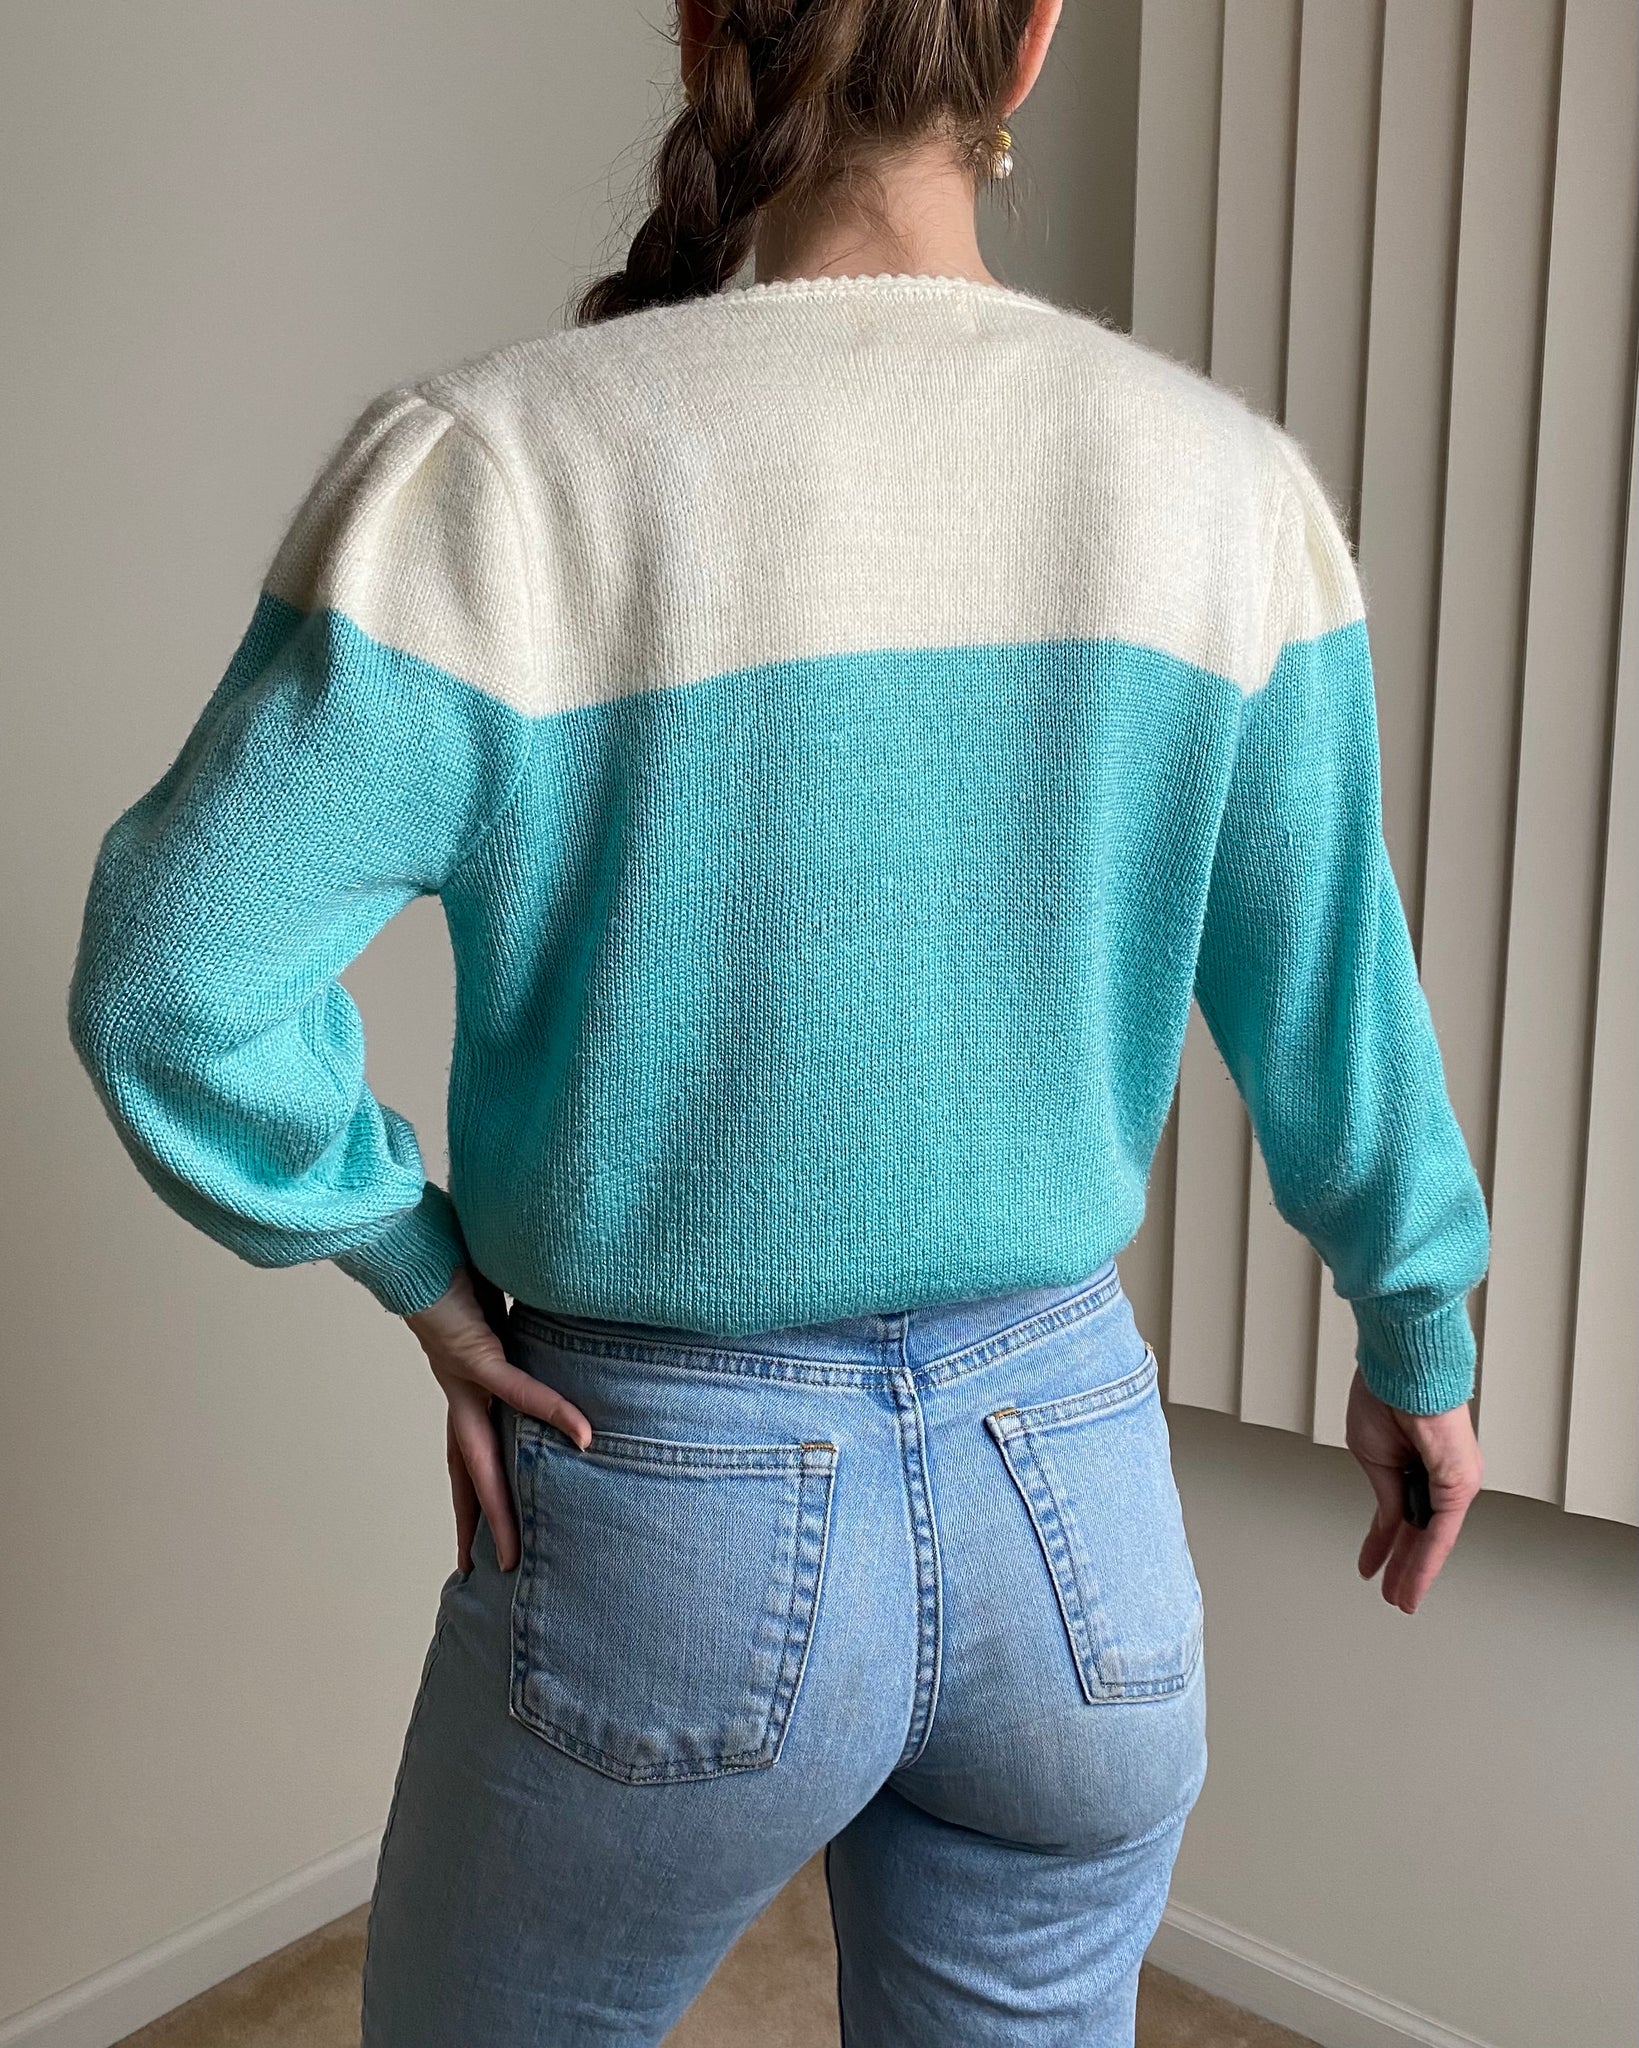 80s Jaclyn Smith Sweater (fits XS/S)